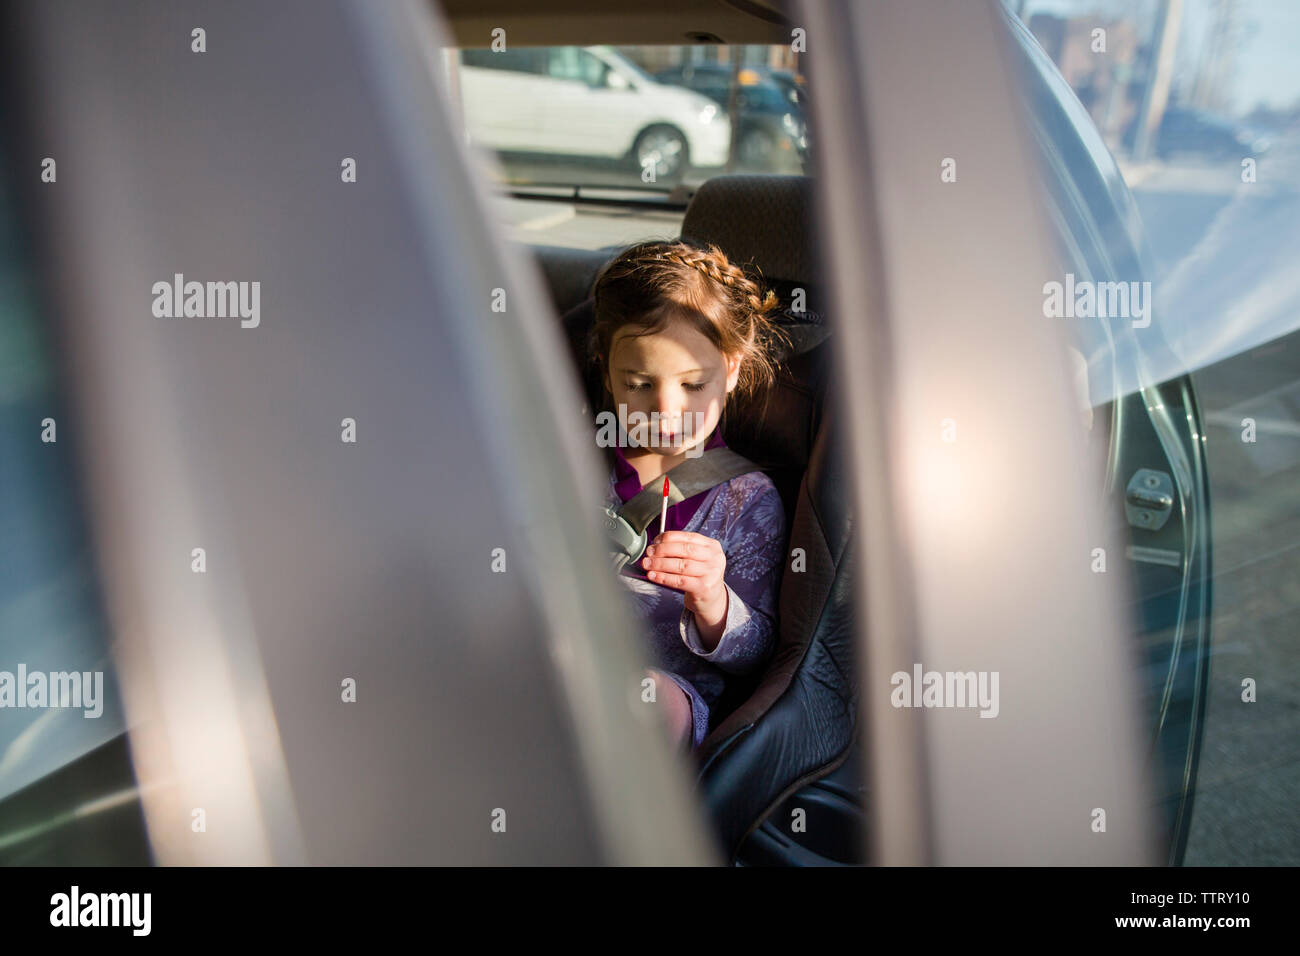 Girl looking at lollipop while sitting in car seen through vehicle door Stock Photo